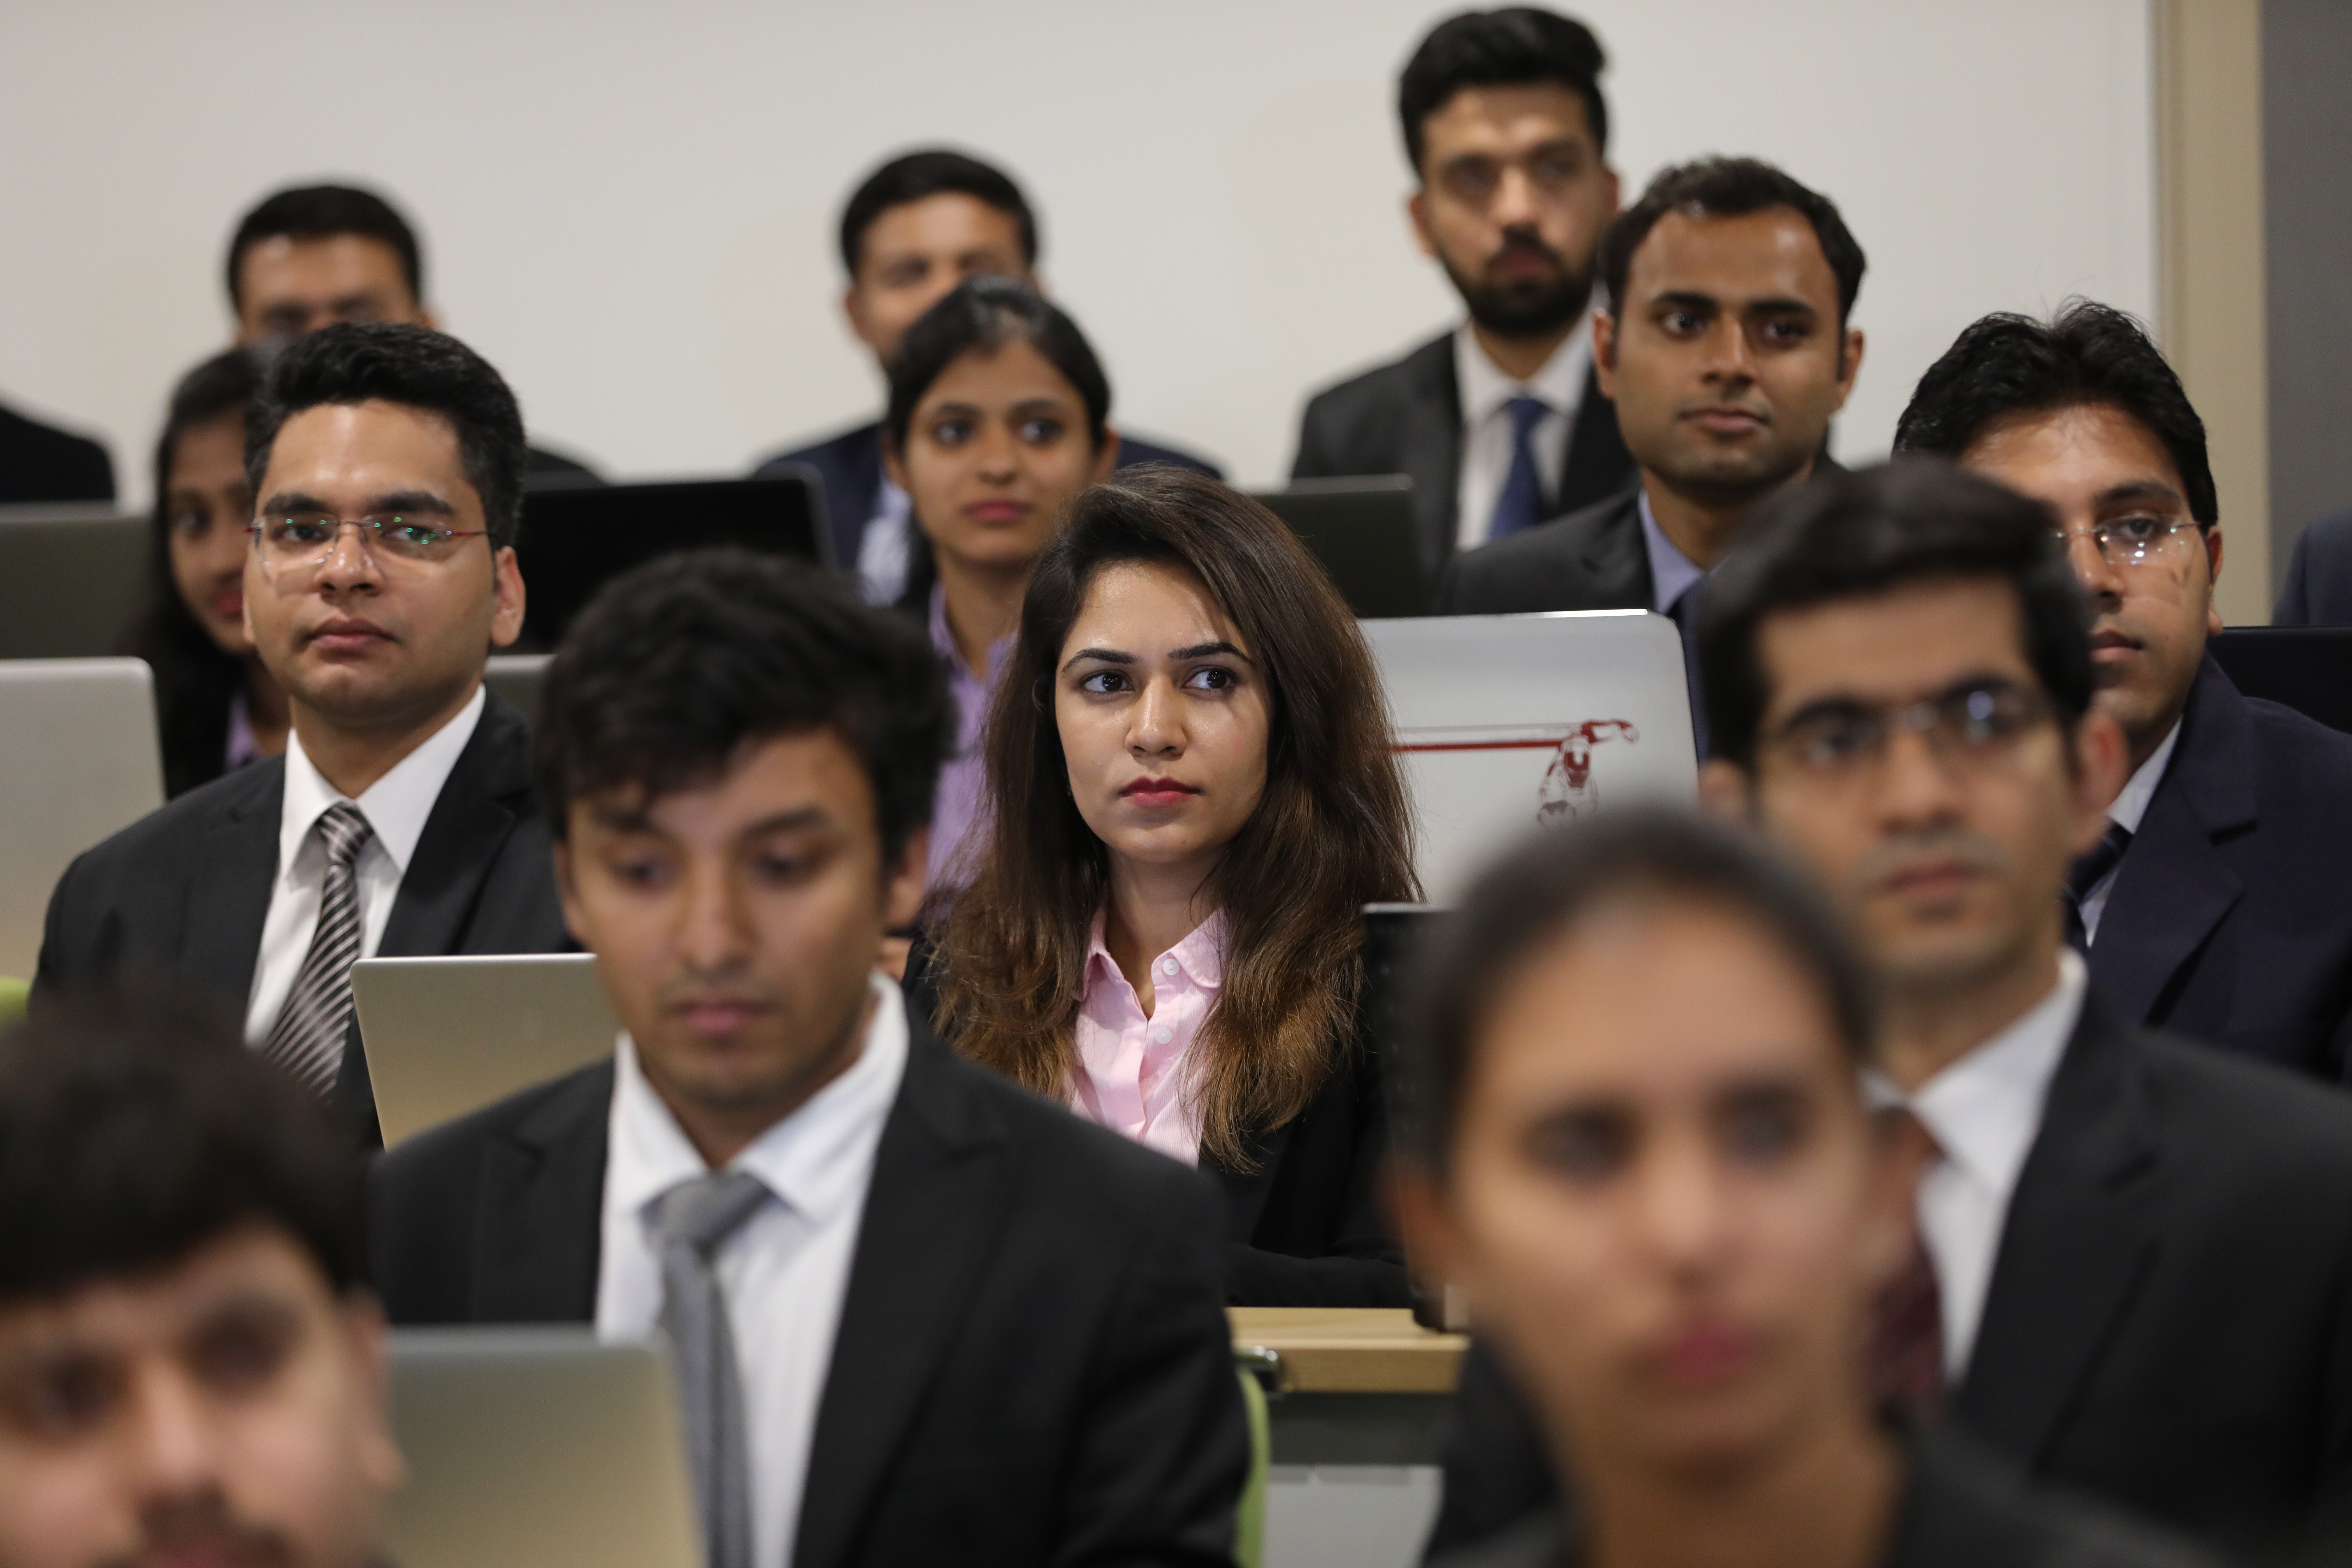 Students from diverse backgrounds in a one-year MBA course